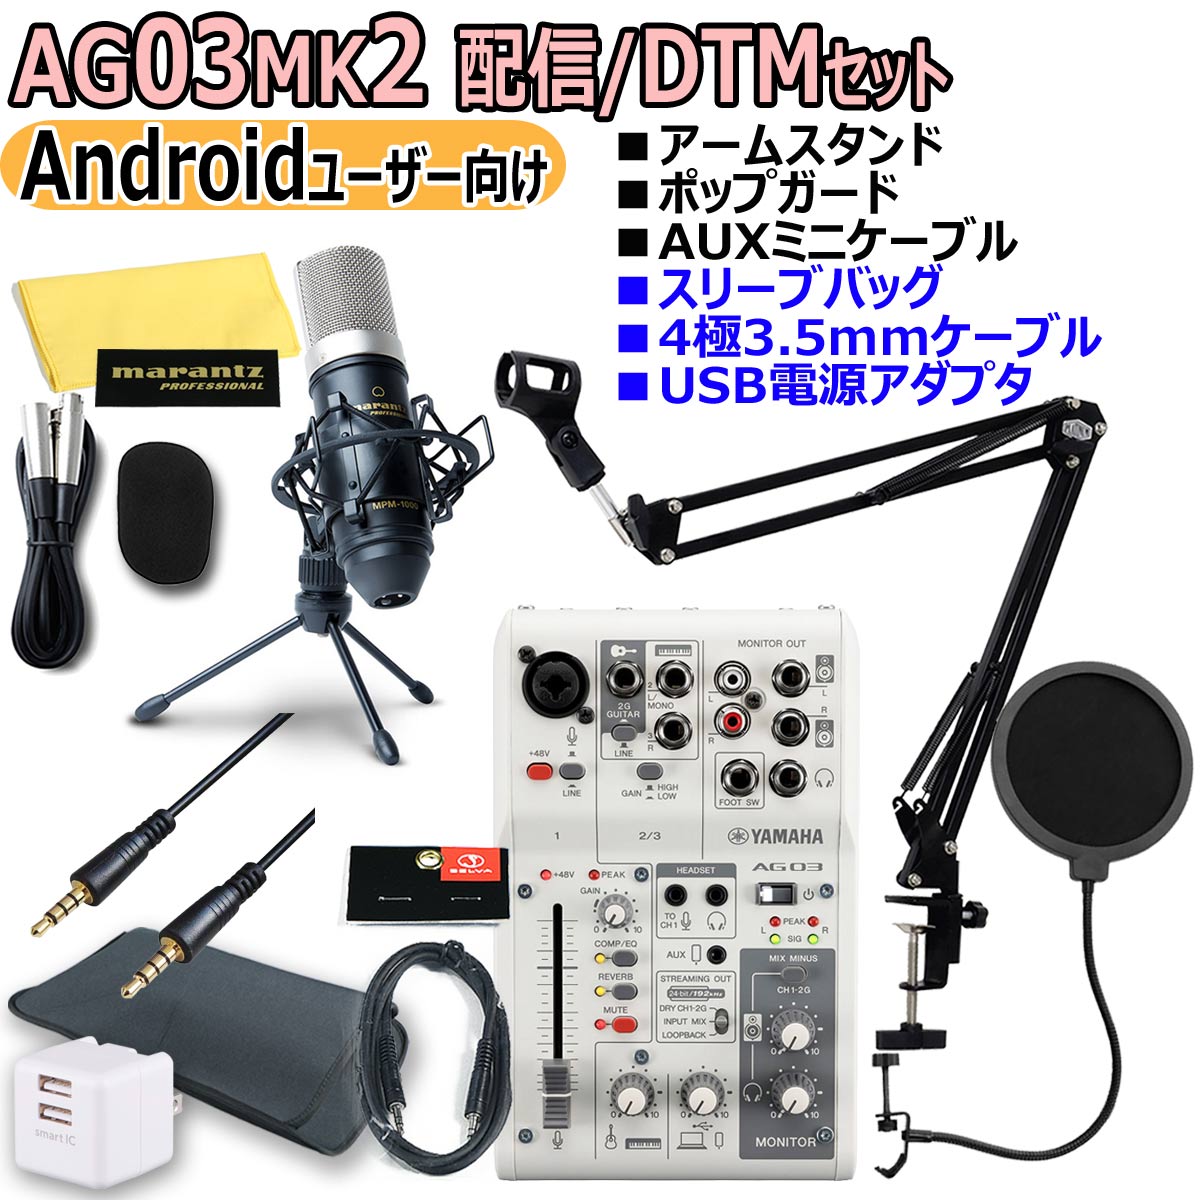 YAMAHA / AG03MK2 WHITE Androidユーザー向け 配信/DTMセット